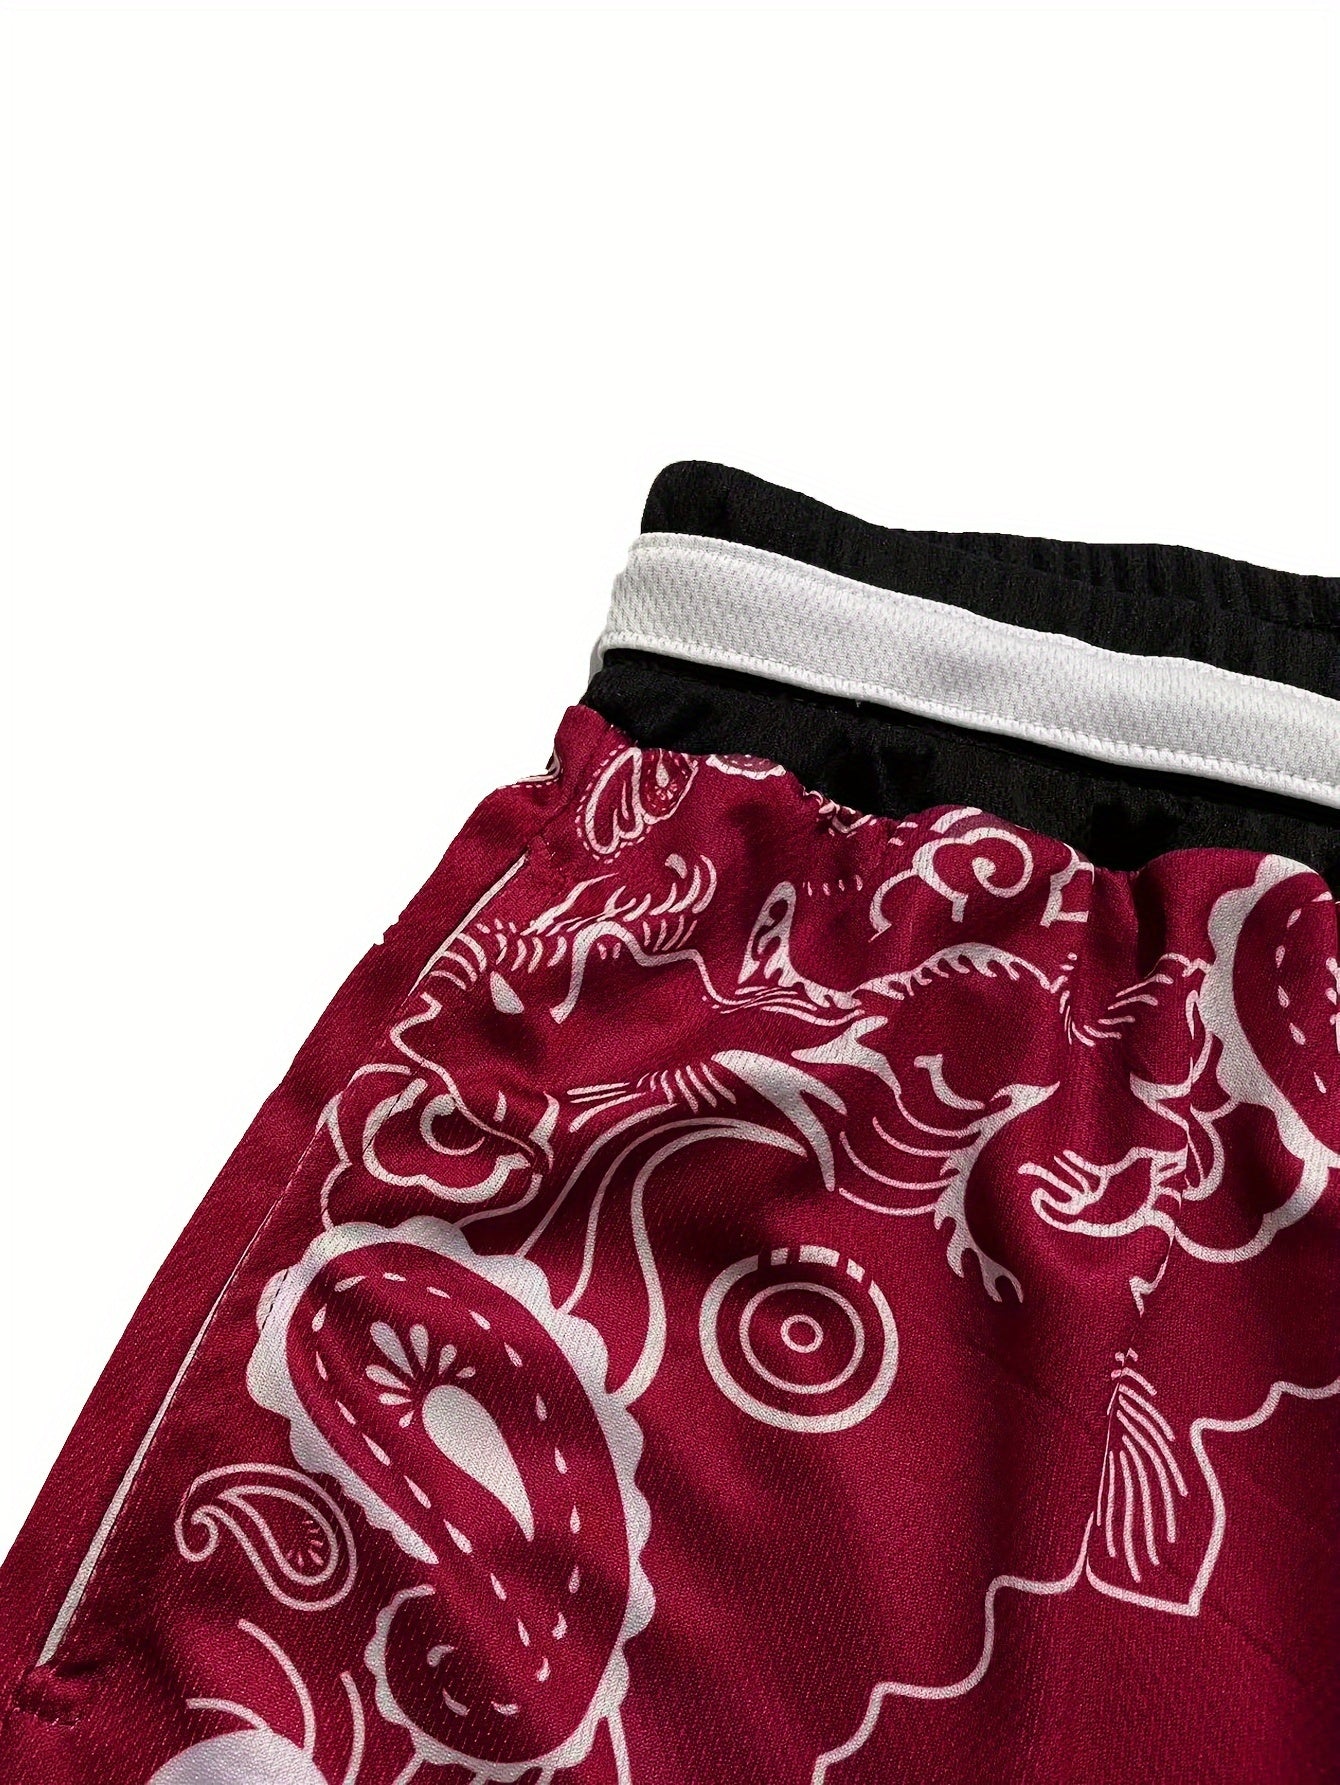 Outdoor Sport Shorts for Men - Paisley Print, Breathable & Stretchable